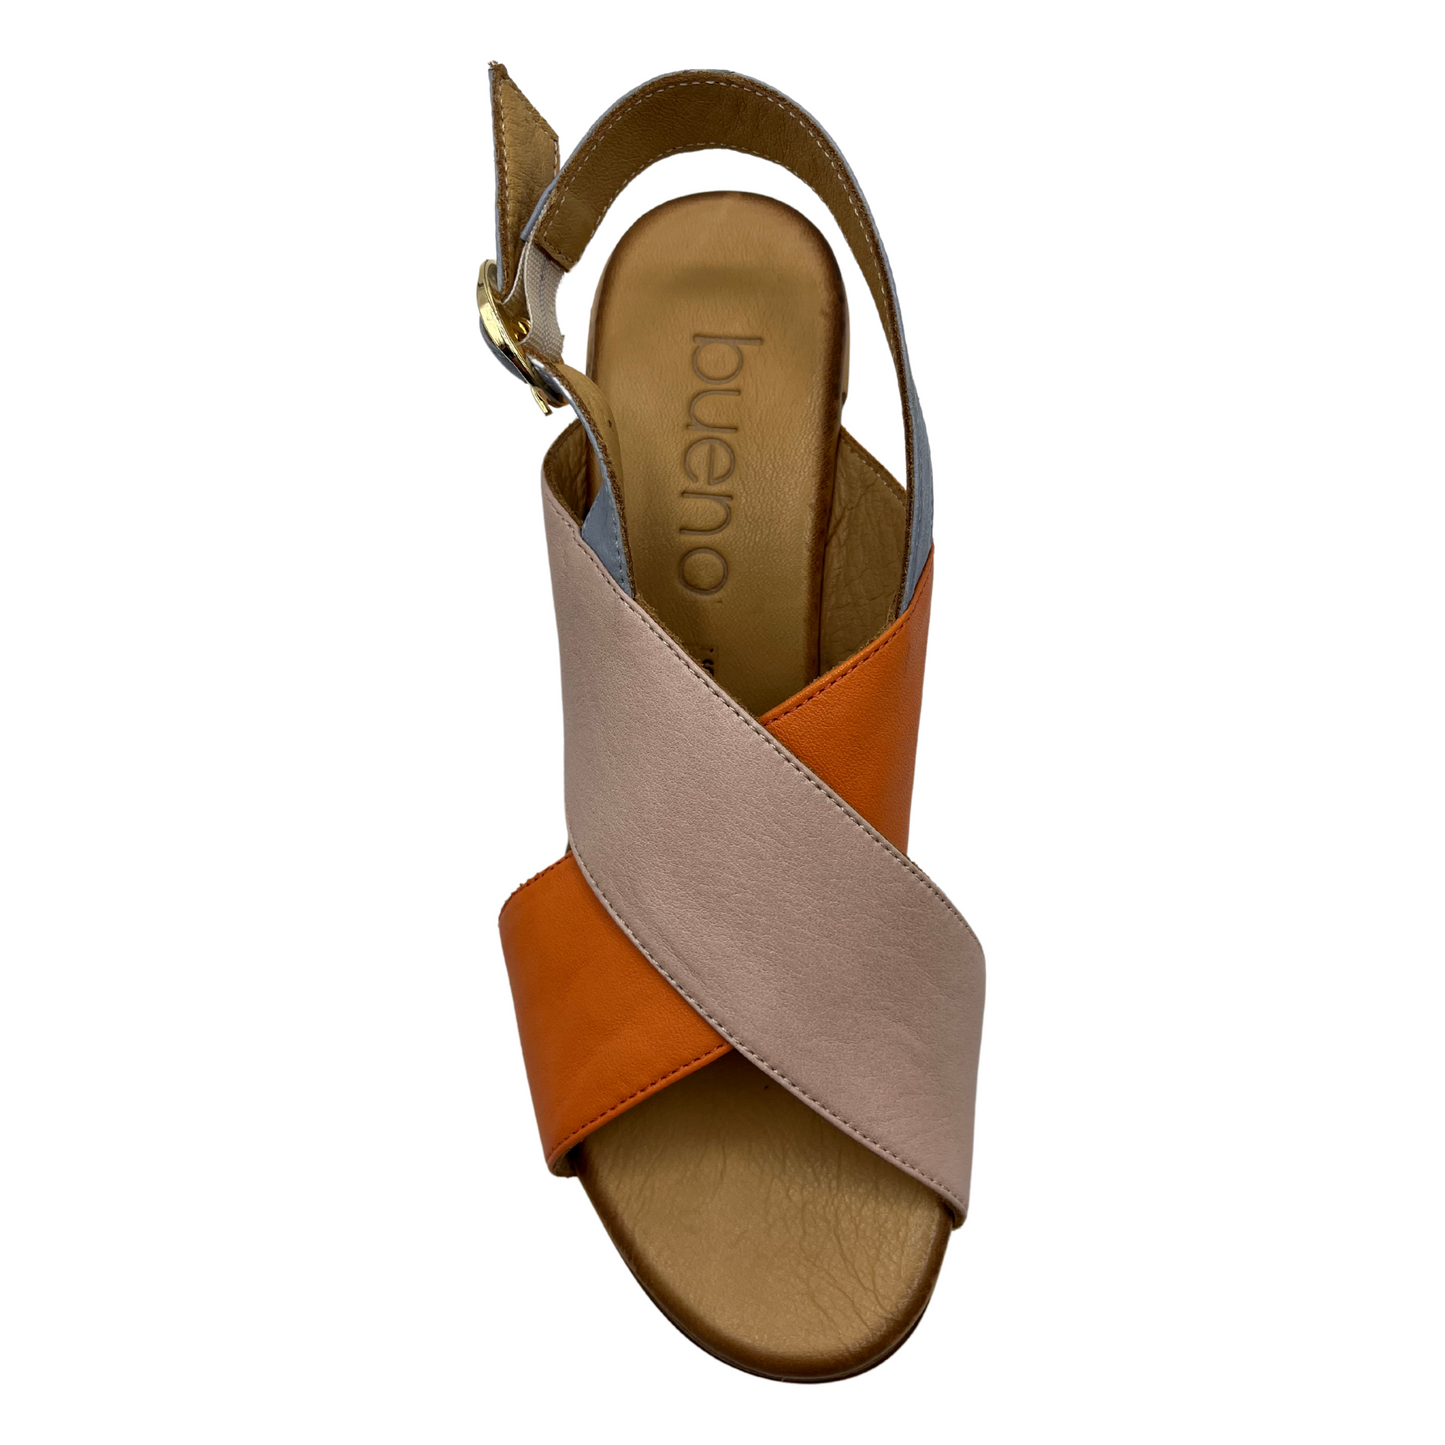 Top view of leather sandal with orange and pale pink straps. It has a block heel and grey slingback strap